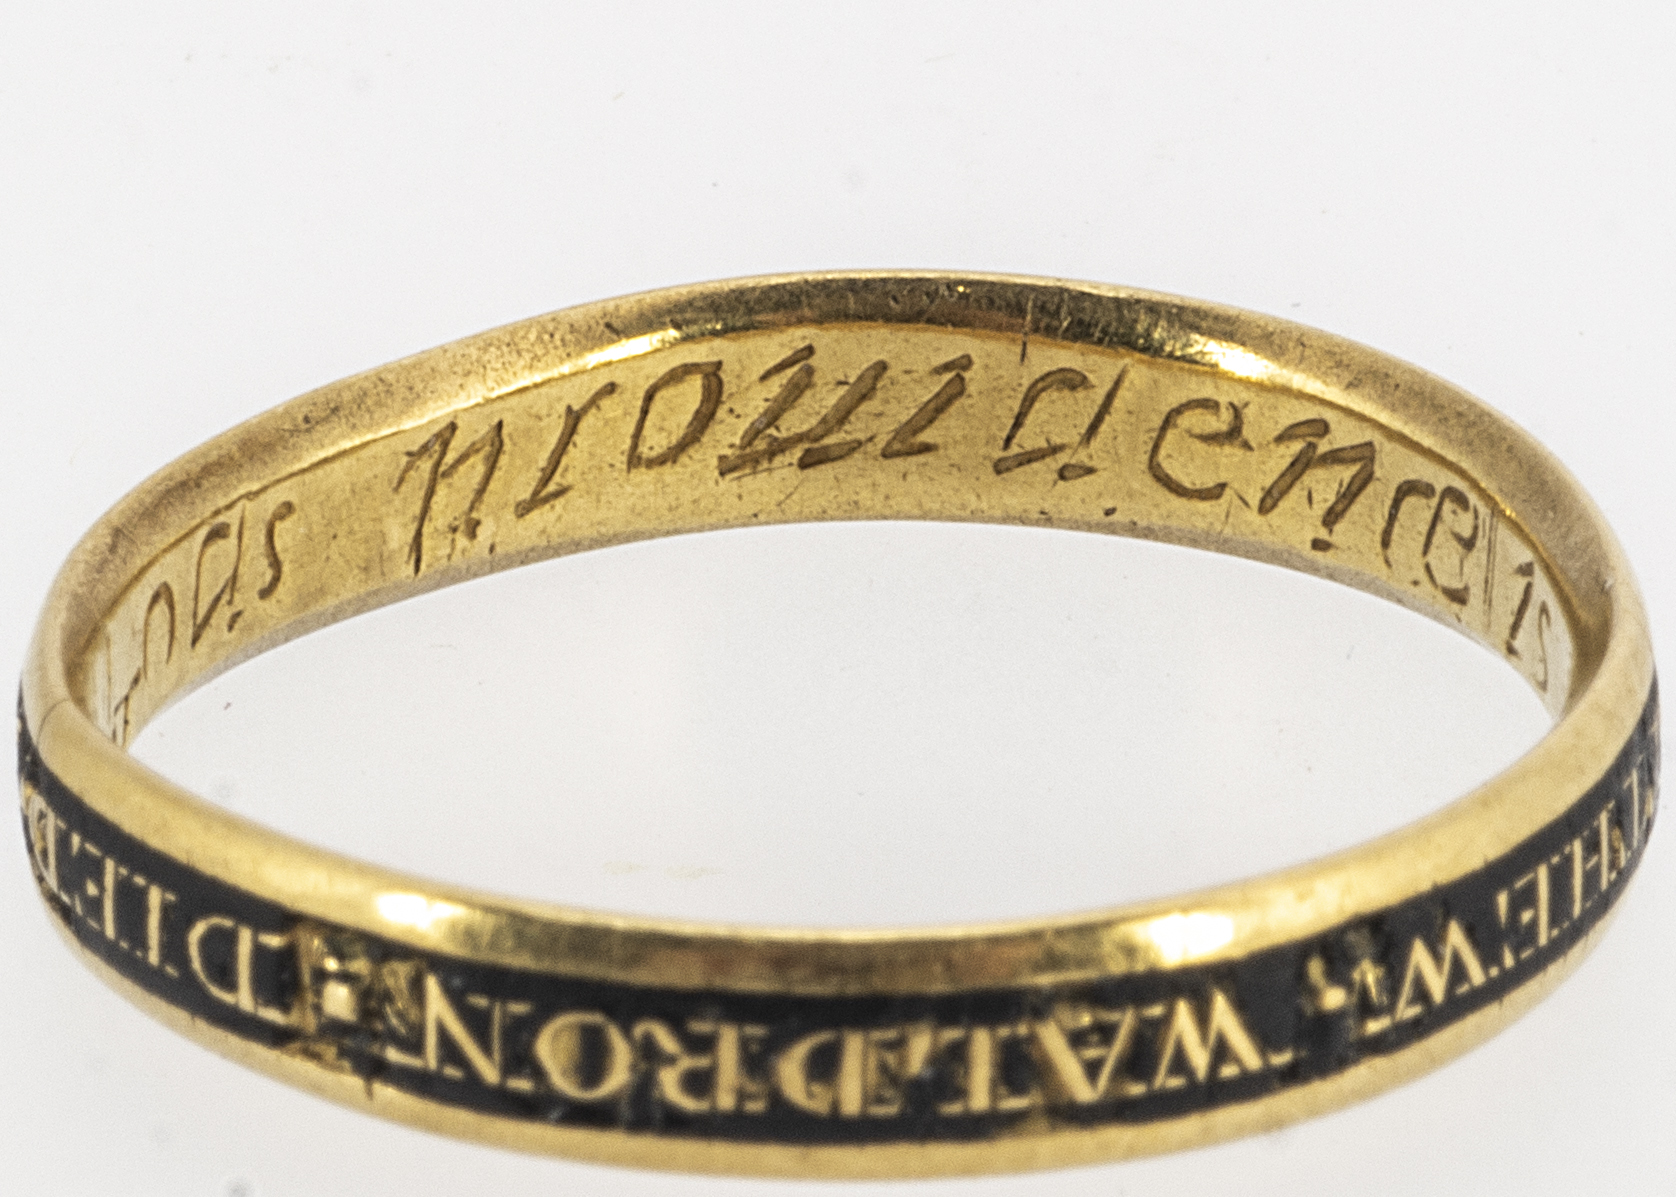 A mid 18th century Georgian mourning gold and enamel ring, ov plain band shape, the outer shank with - Image 2 of 6